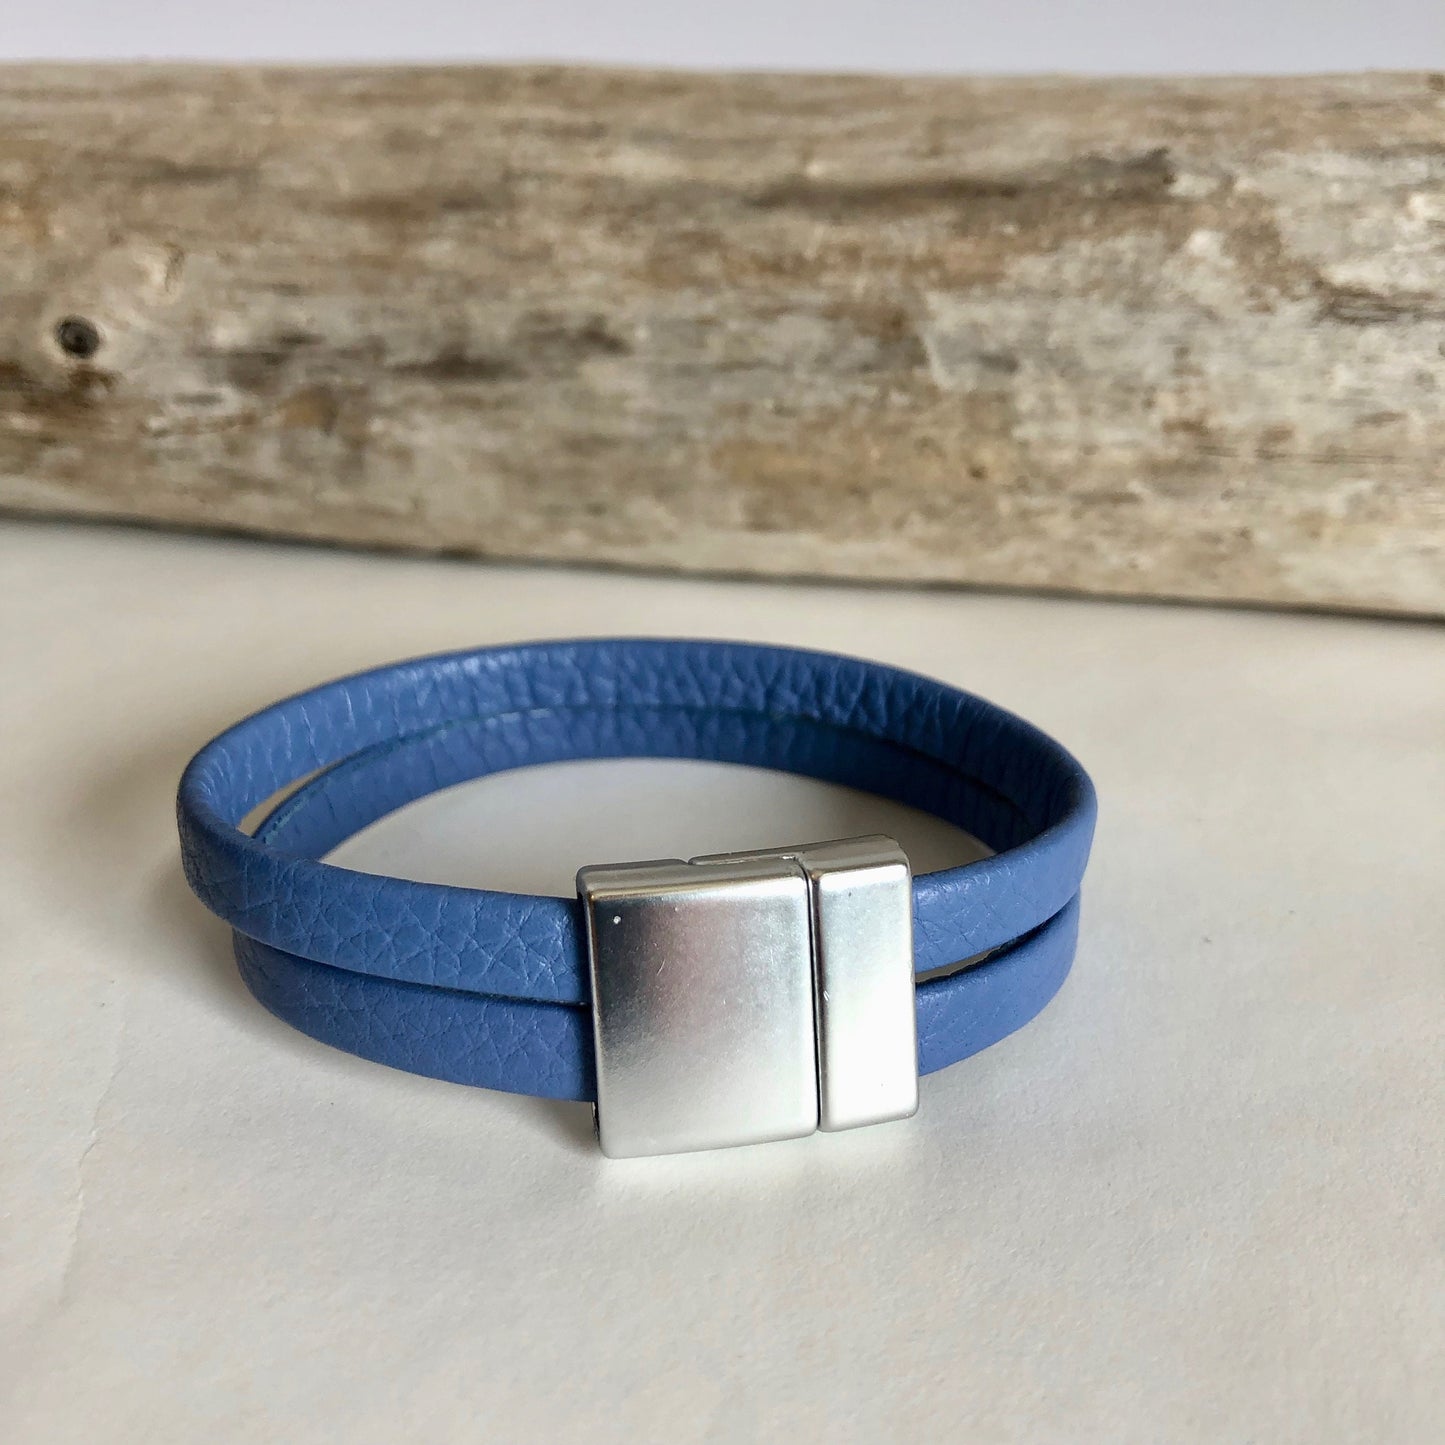 Leather bracelet, made of very soft, fine  Italian leather, and finished with a quality silver  magnetic clasp.